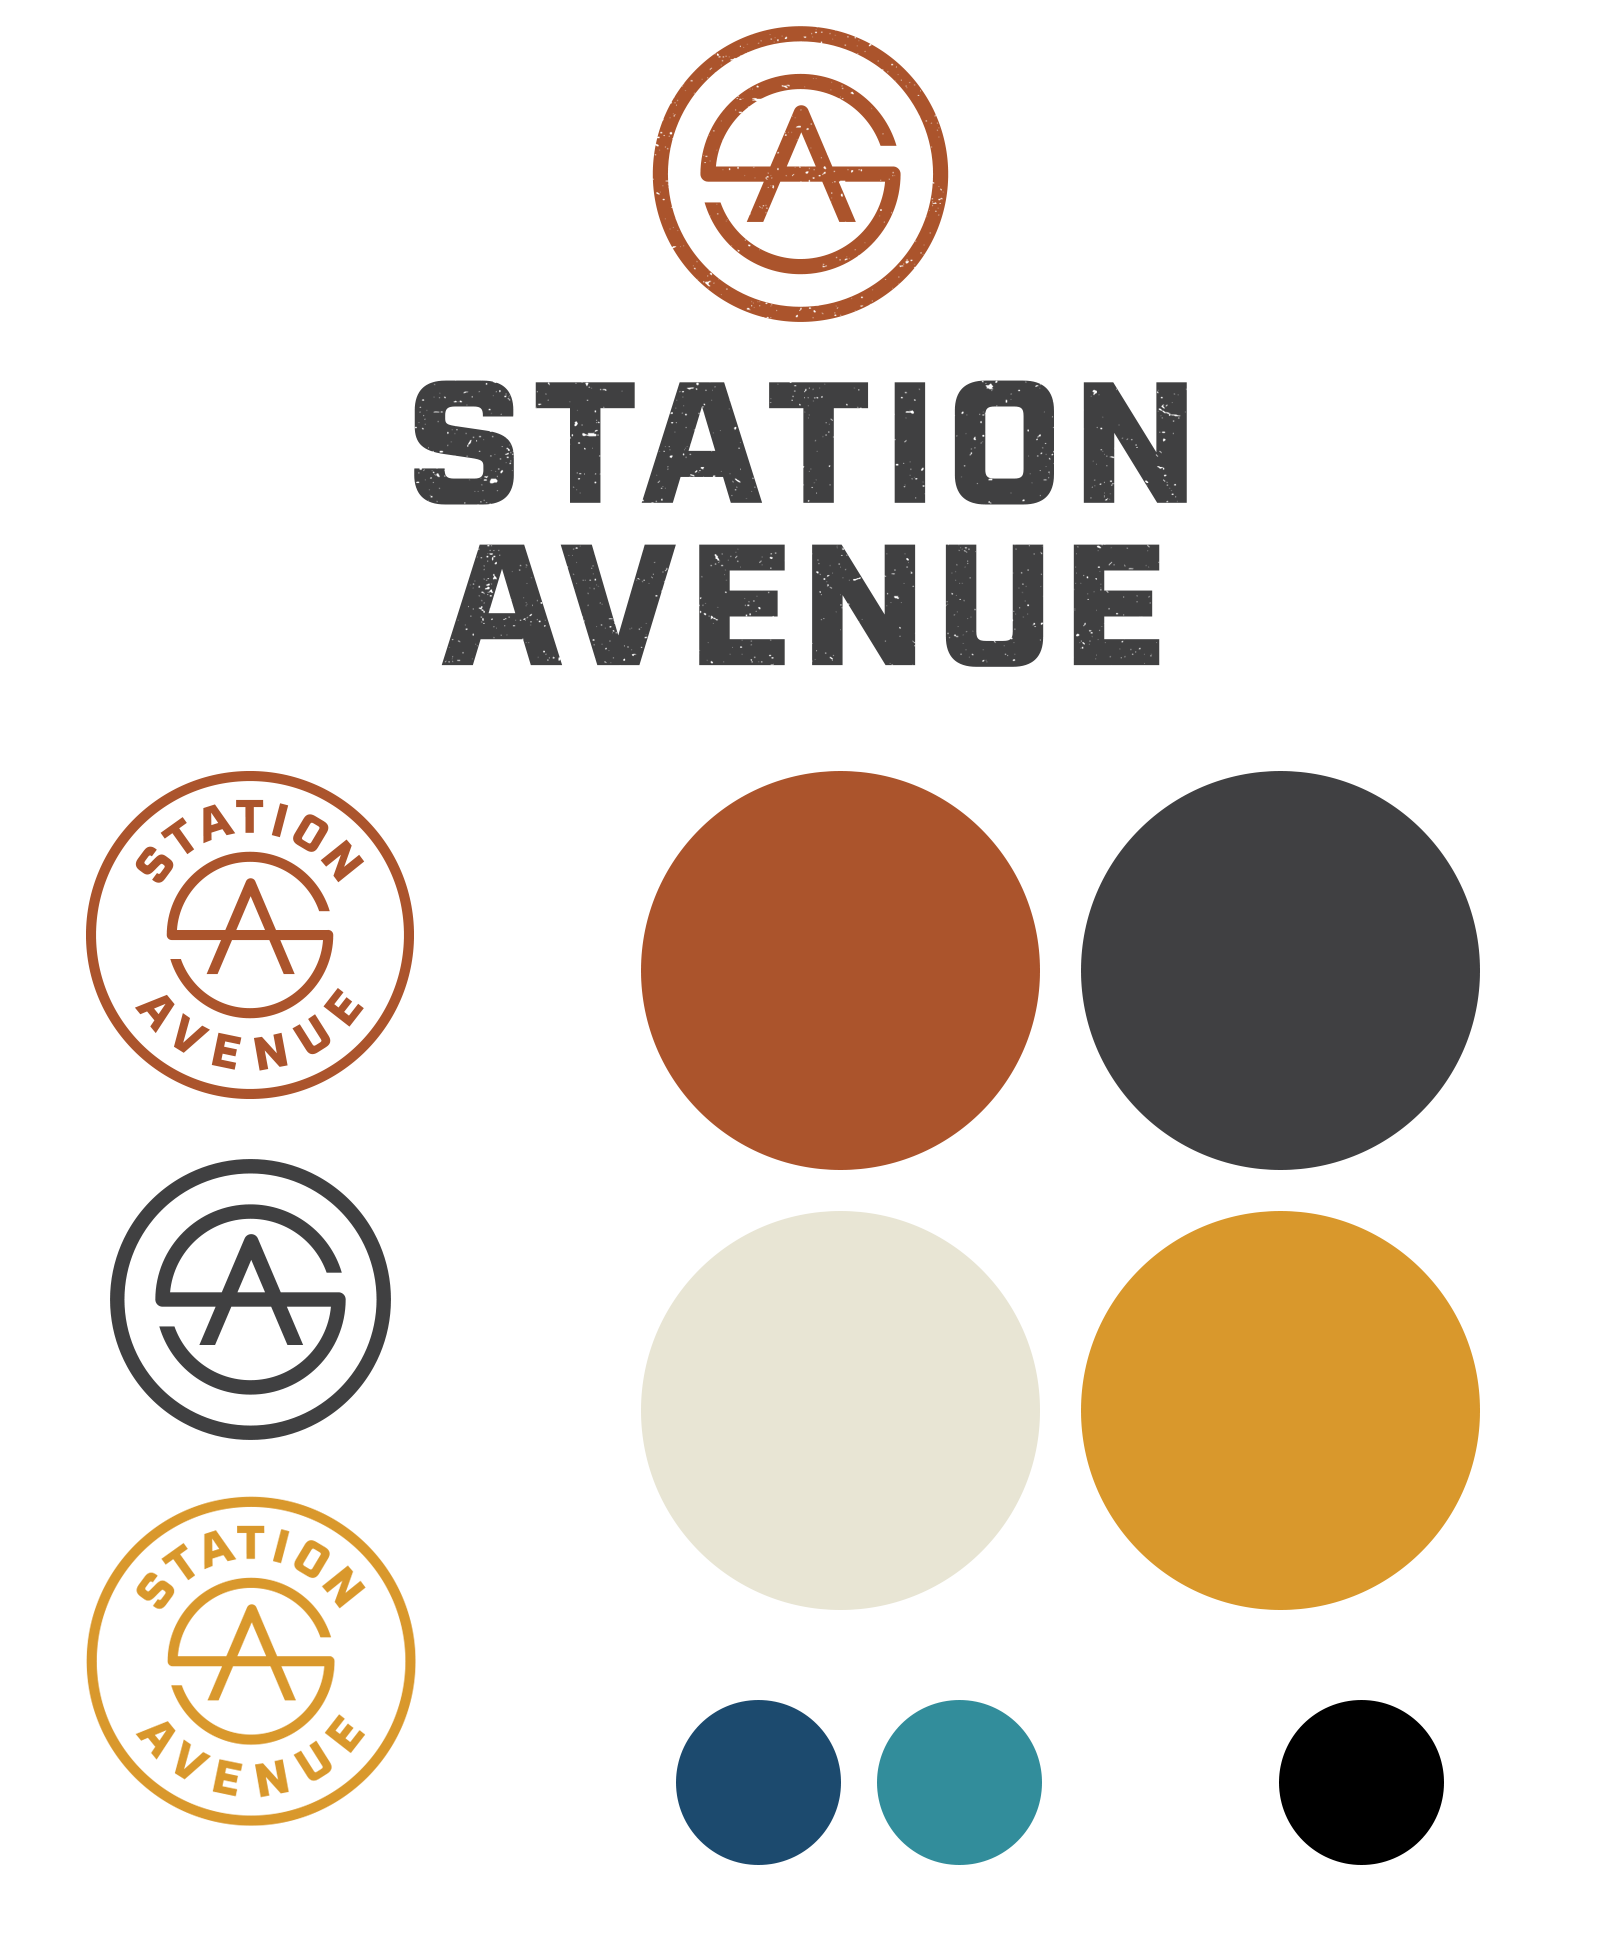 Station Avenue brand color palette featuring a range of colors including burnt orange, charcoal, cream, yellow and aqua